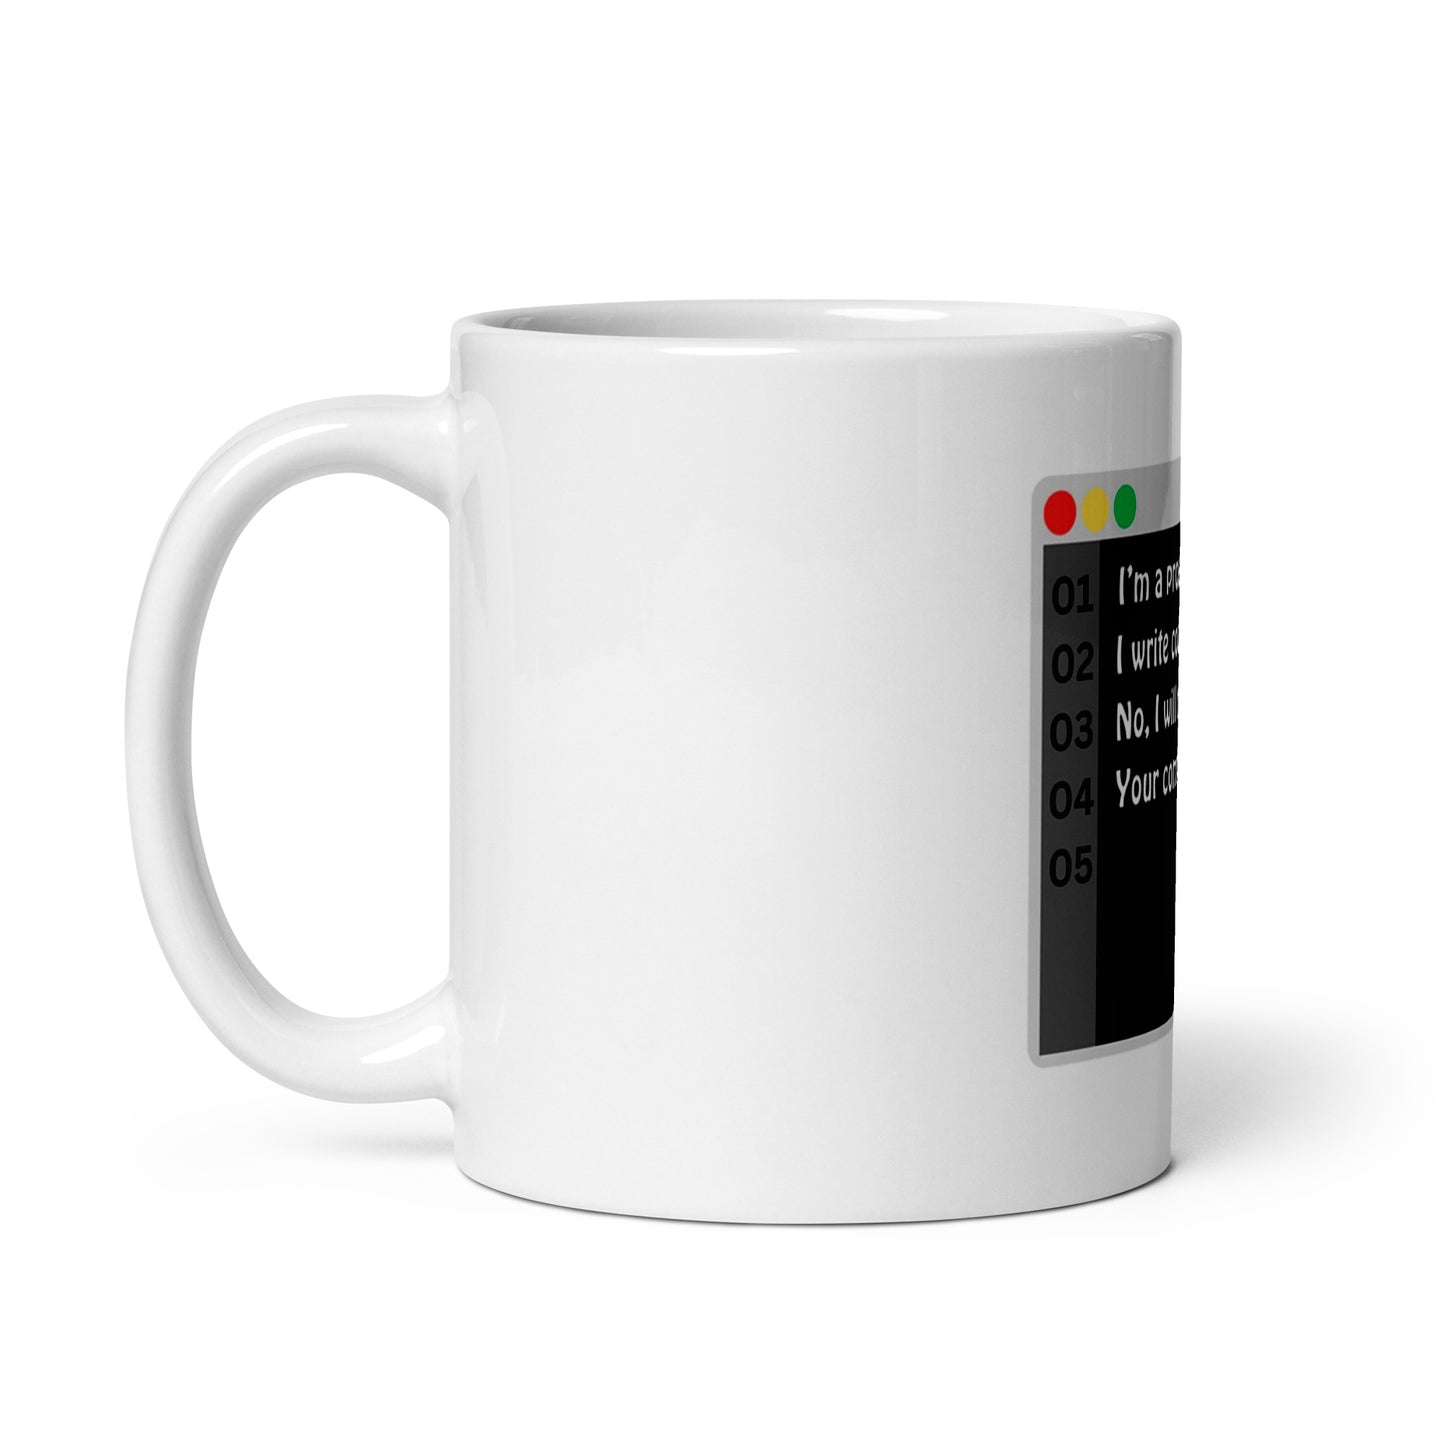 Will Not Fix Your PC mug